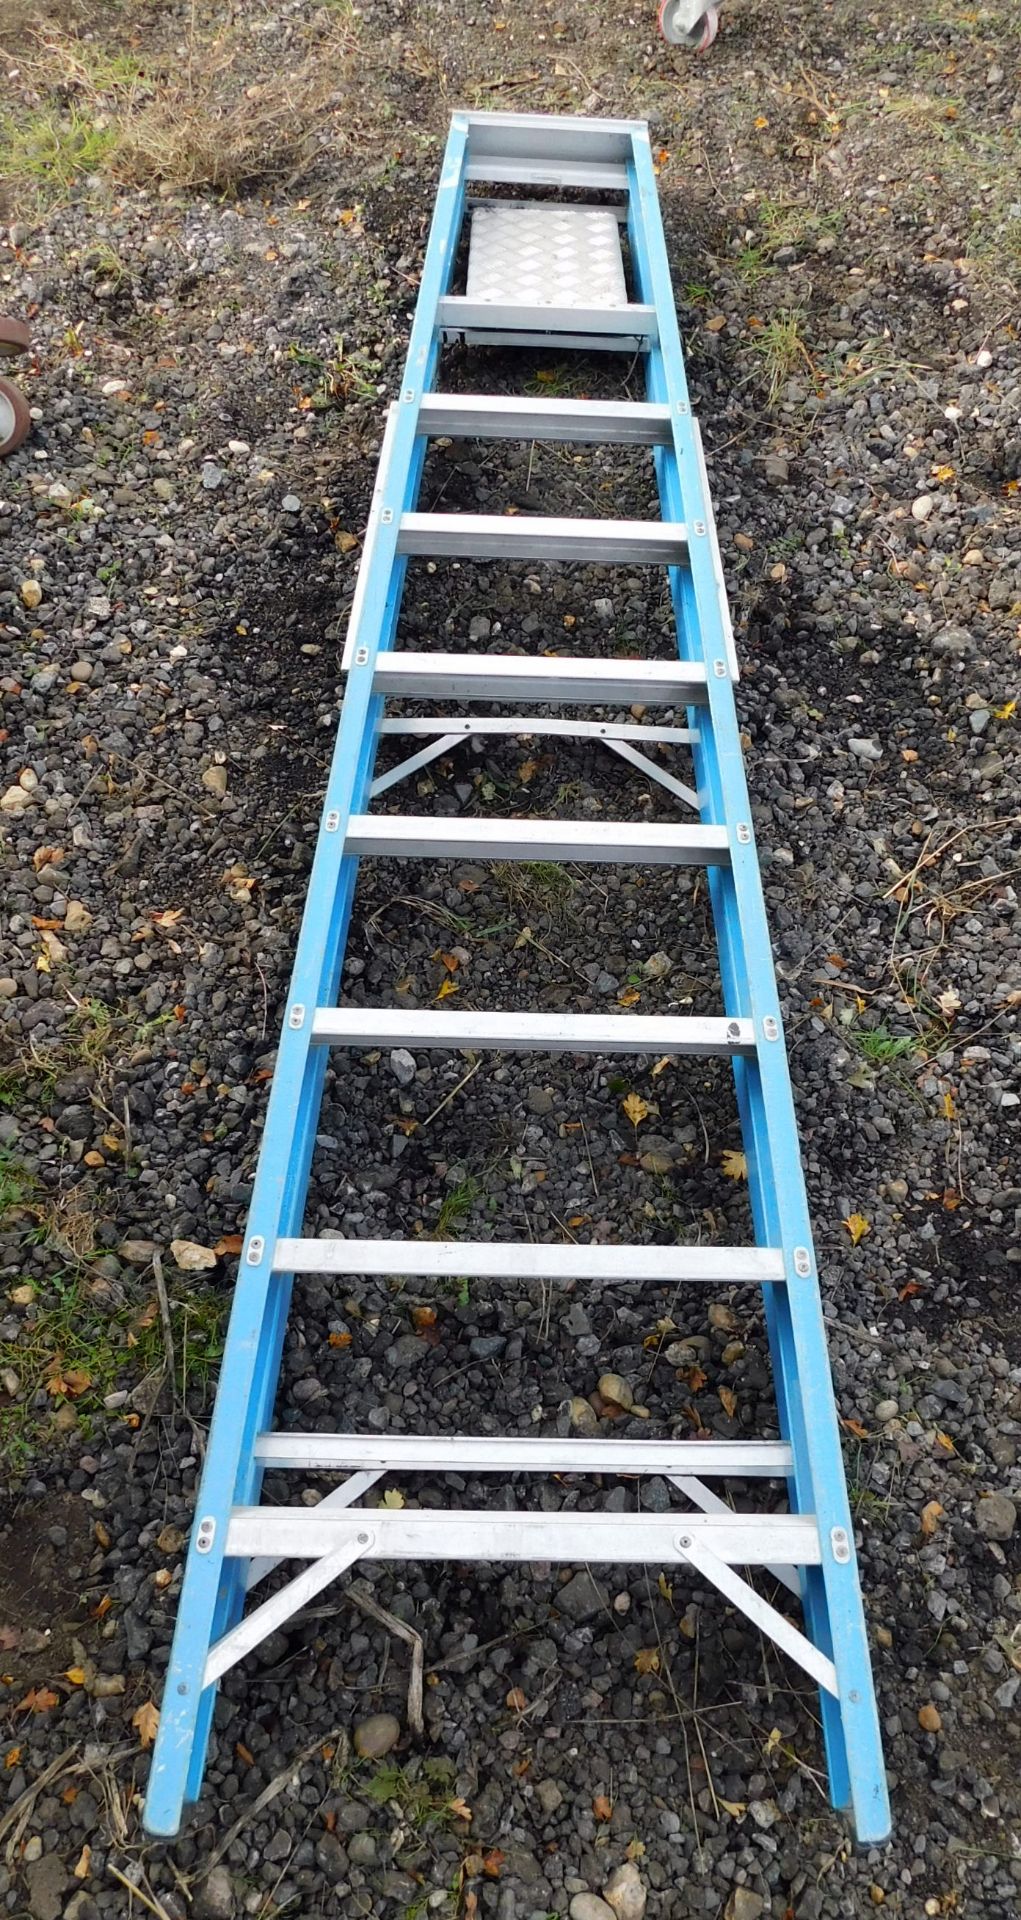 7-Tread Fibreglass Step Ladder (Located Upminster – See General Notes for Full Address)